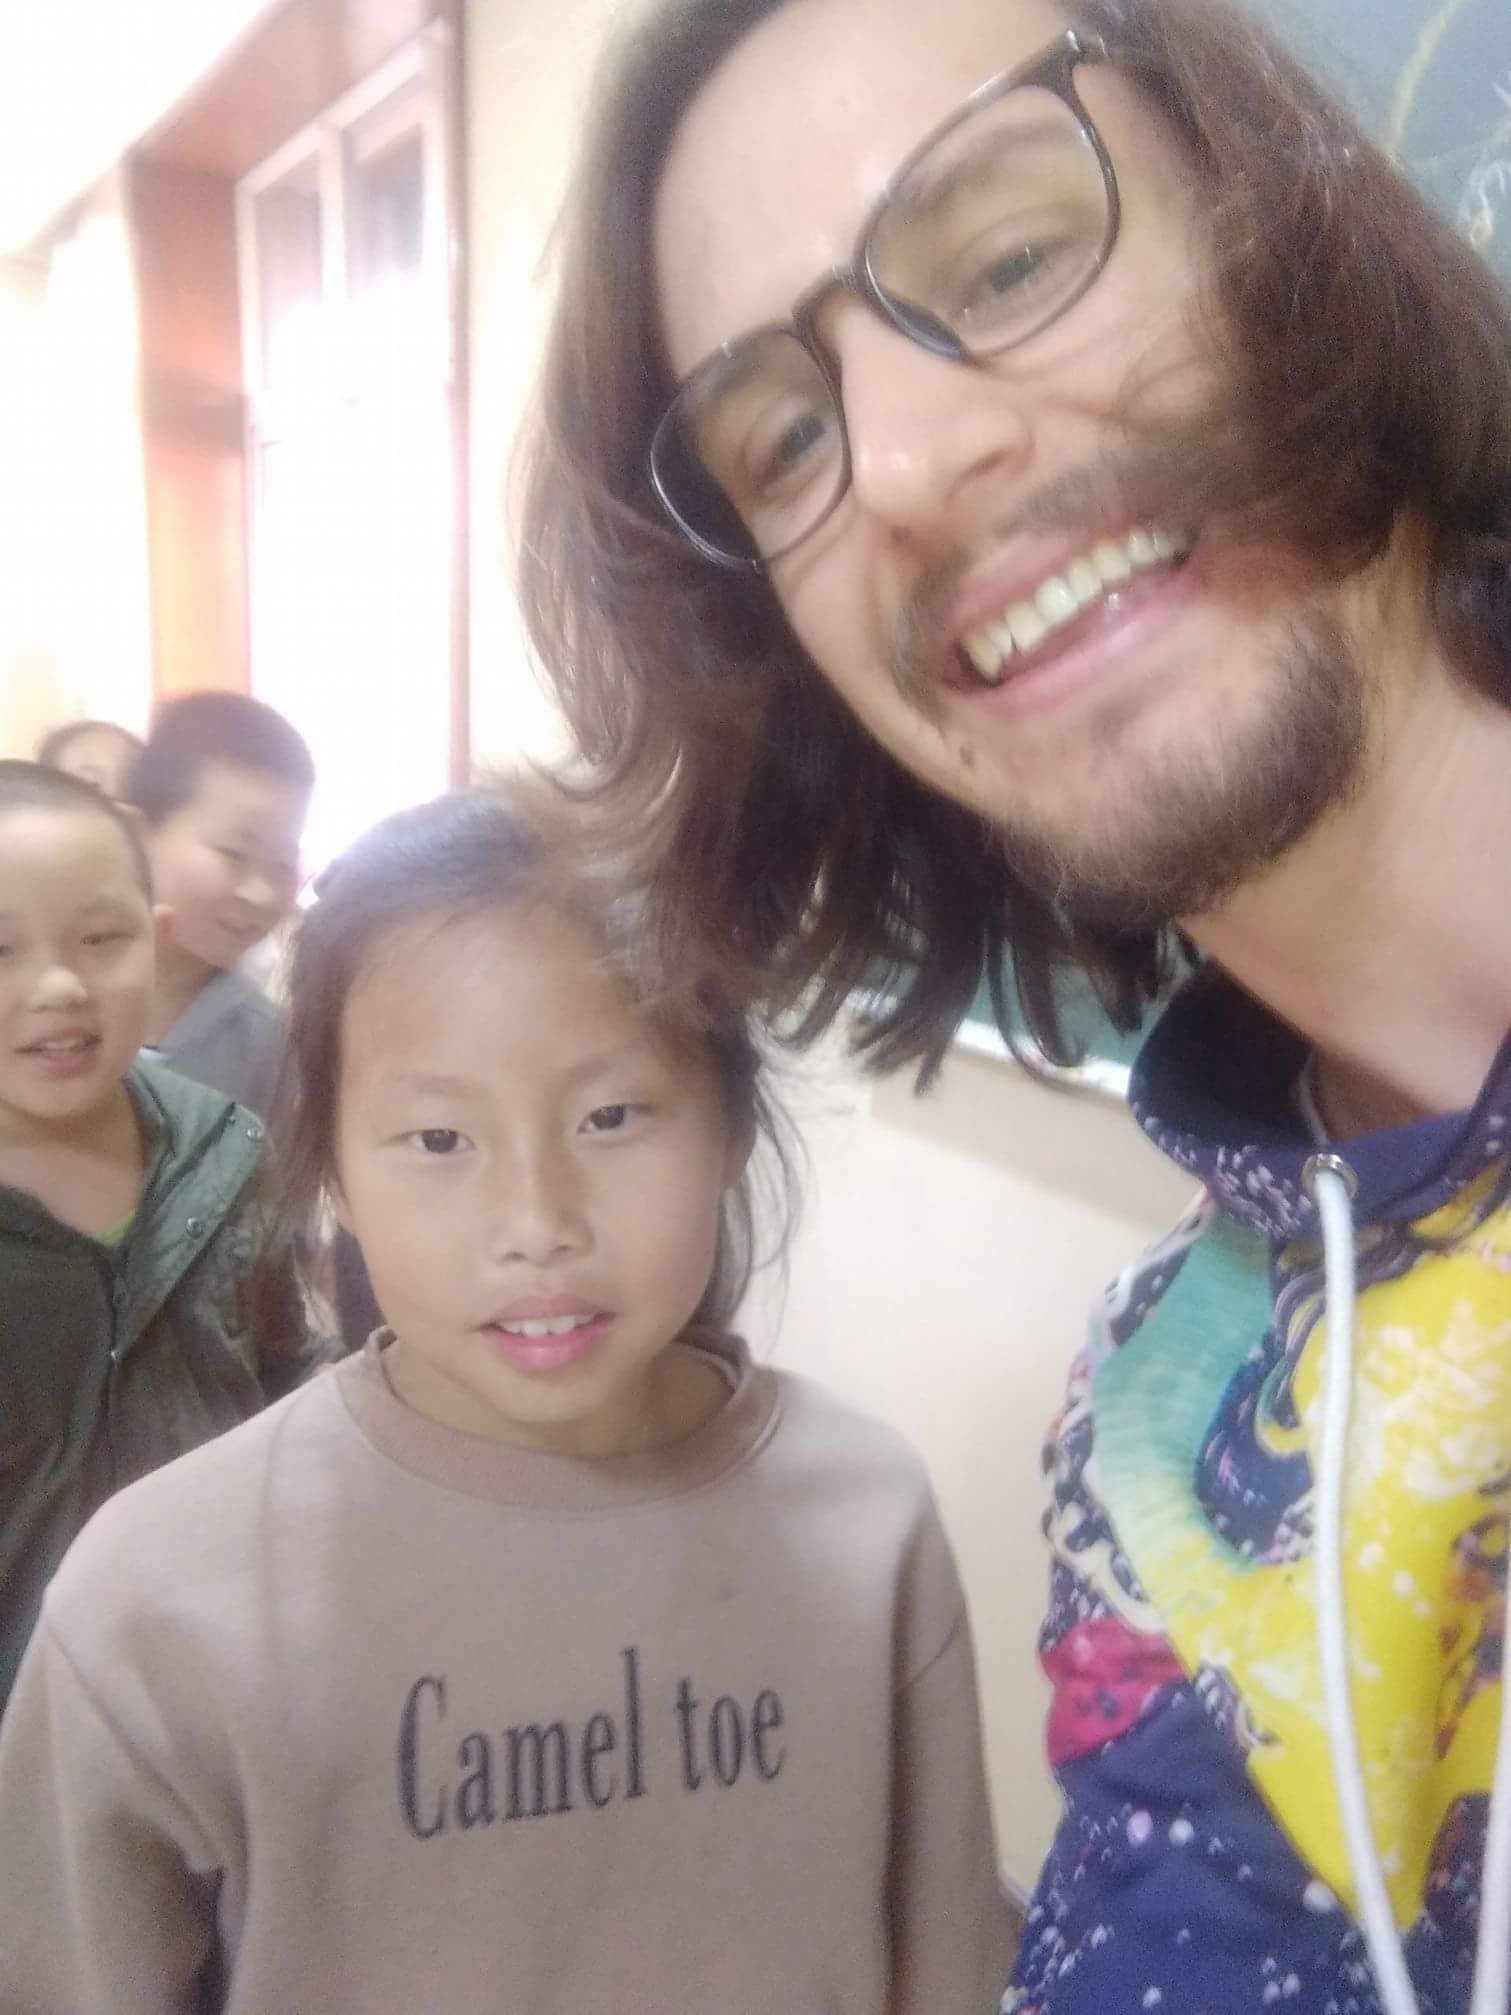 My Swedish friend teaching in China posing with his favorite student.